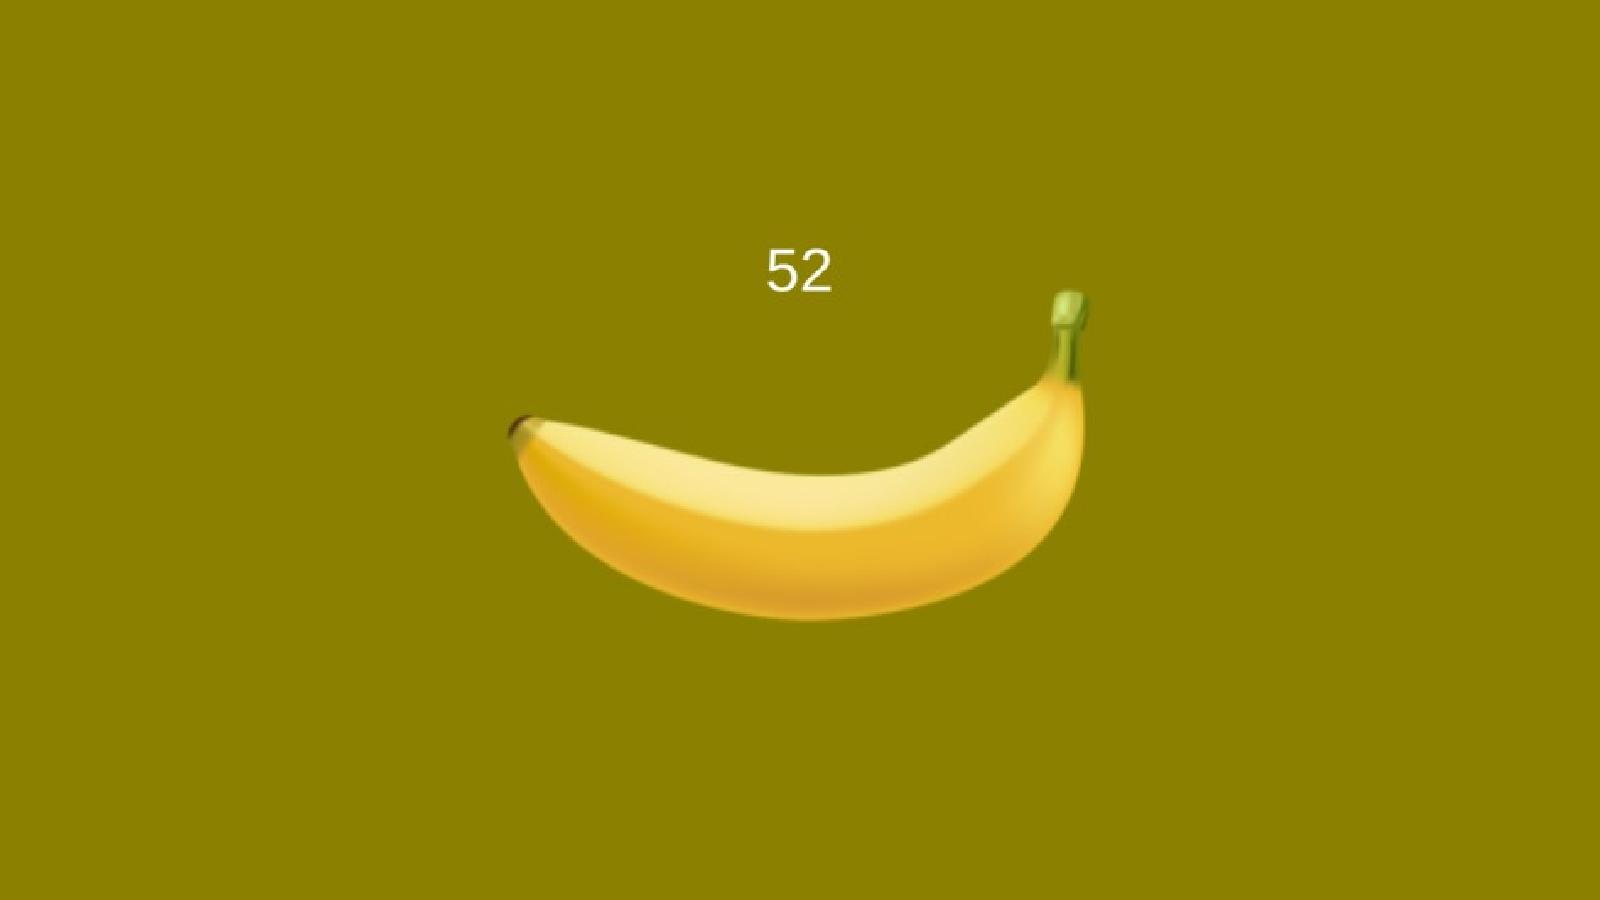 in-game image of Banana